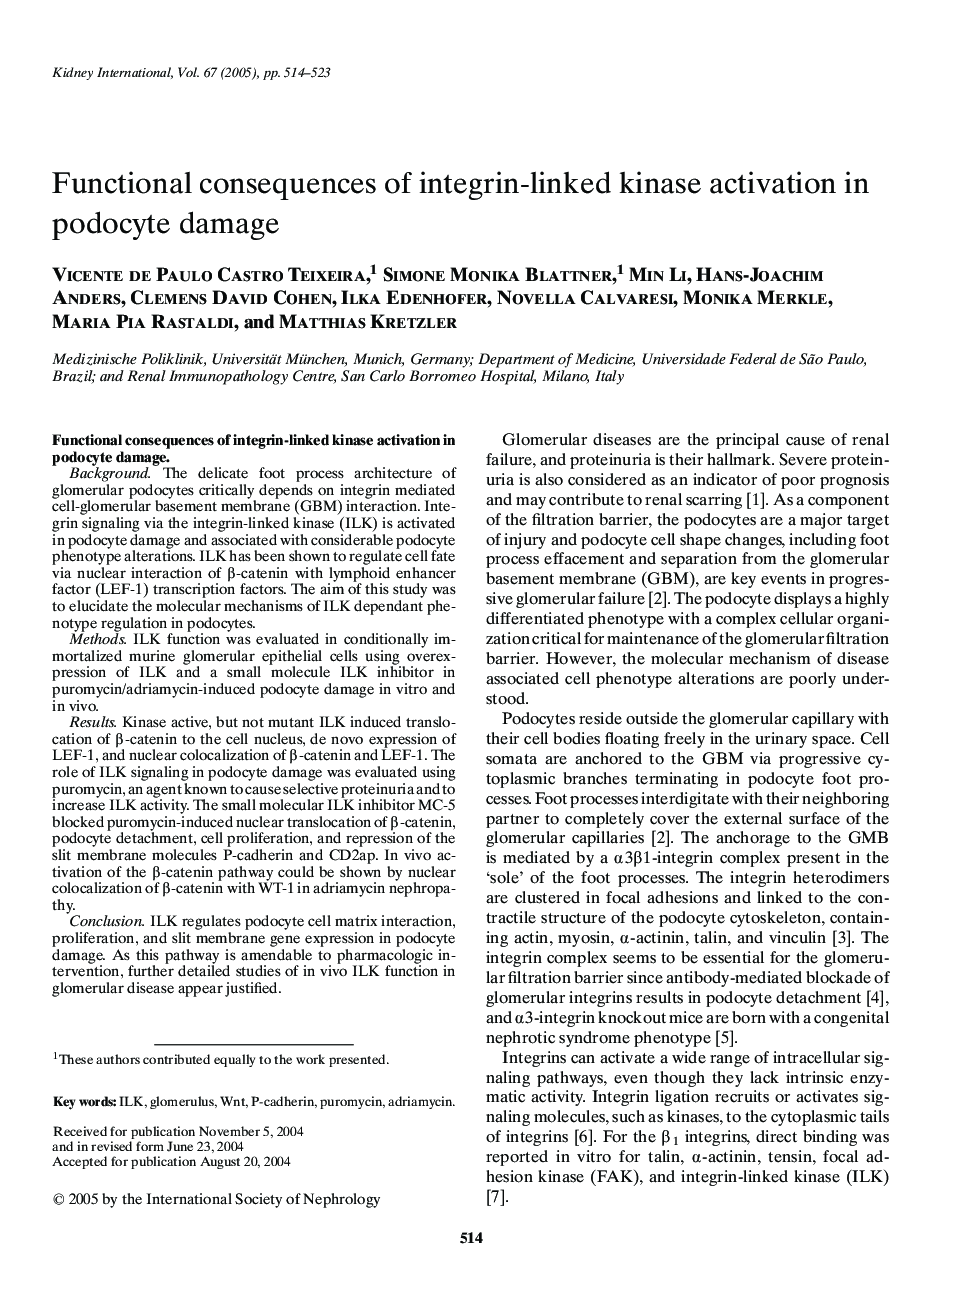 Functional consequences of integrin-linked kinase activation in podocyte damage